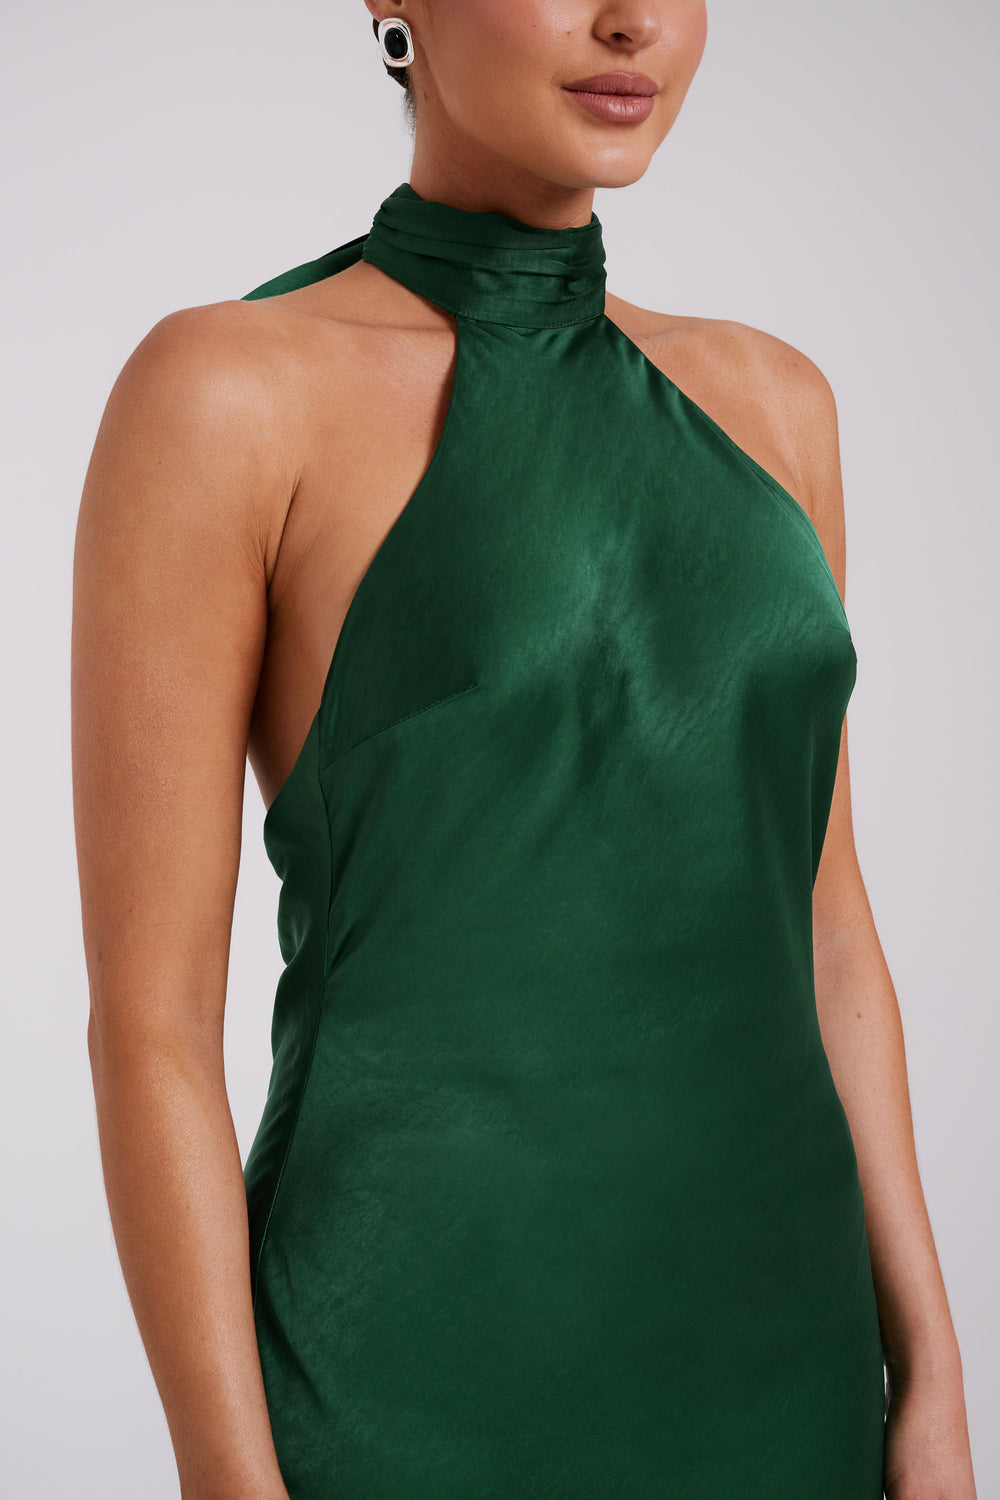 Paulette Satin Maxi Dress With Bow - Emerald